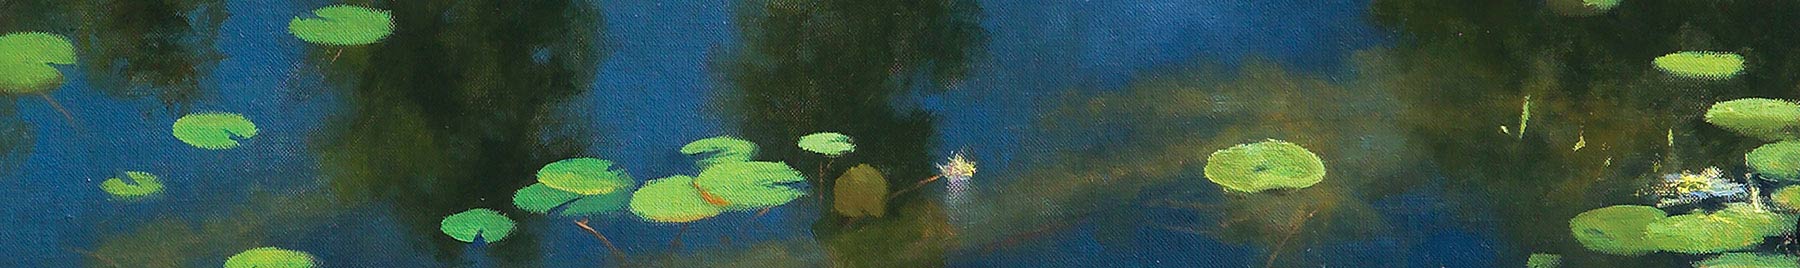 oil painting of lily pads on a pond with reflections